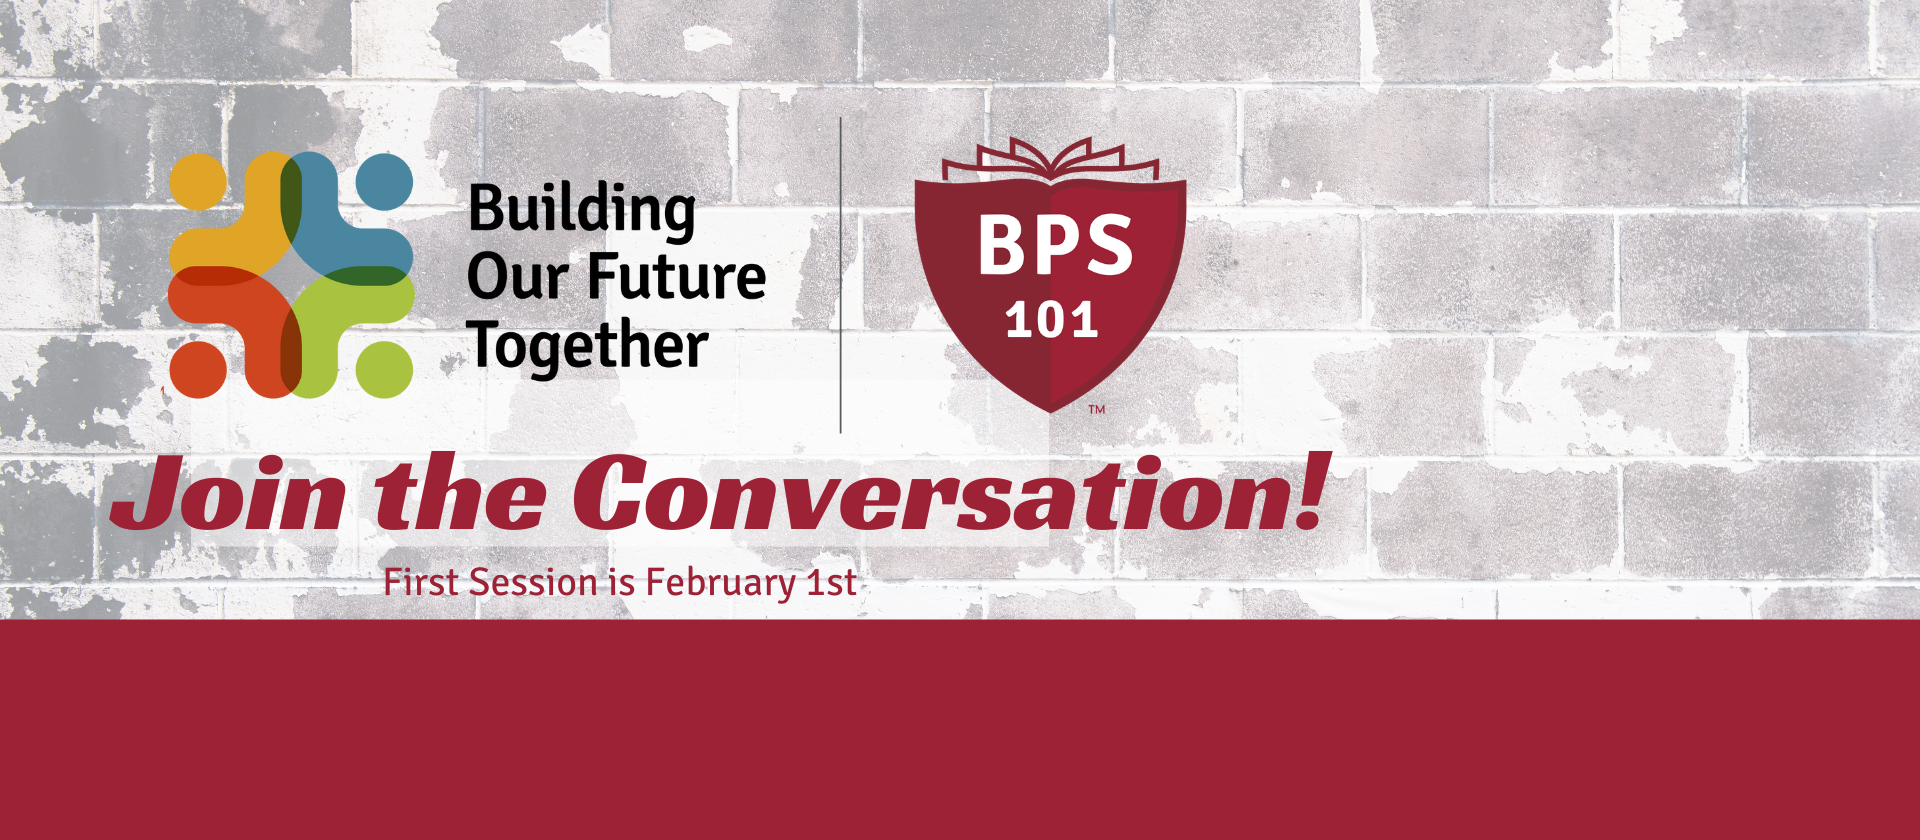 <h2>Building Our Future Together</h2>
<p class="p2"><span class="s1">Learn more about the process and details on our community engagement sessions.</span></p>
<p>&nbsp;</p>
<a href="https://www.bps101.net/boft/" class="button ">HERE</a>
